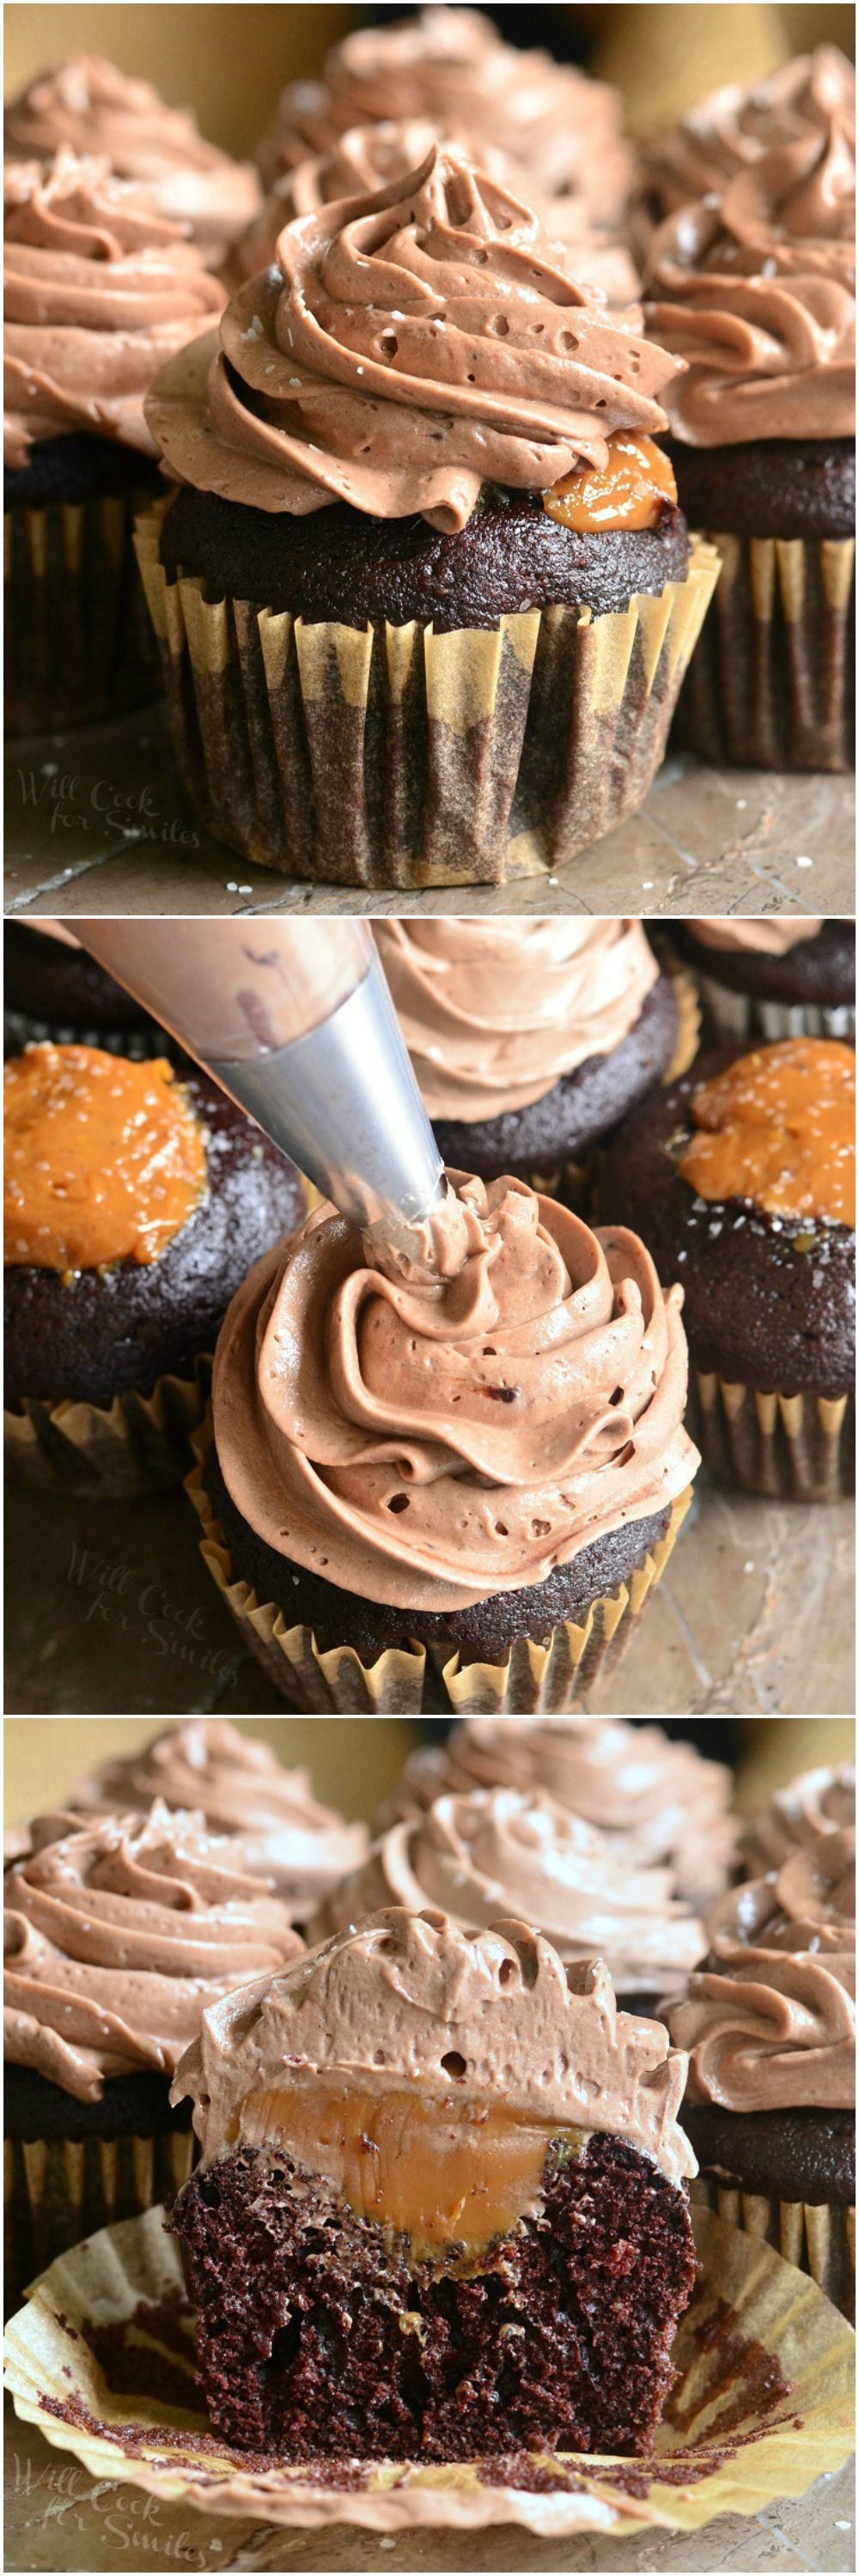 Chocolate Cupcakes with Salted Dulce de Leche Filling and Salted Chocolate Buttercream. Rich, decadent